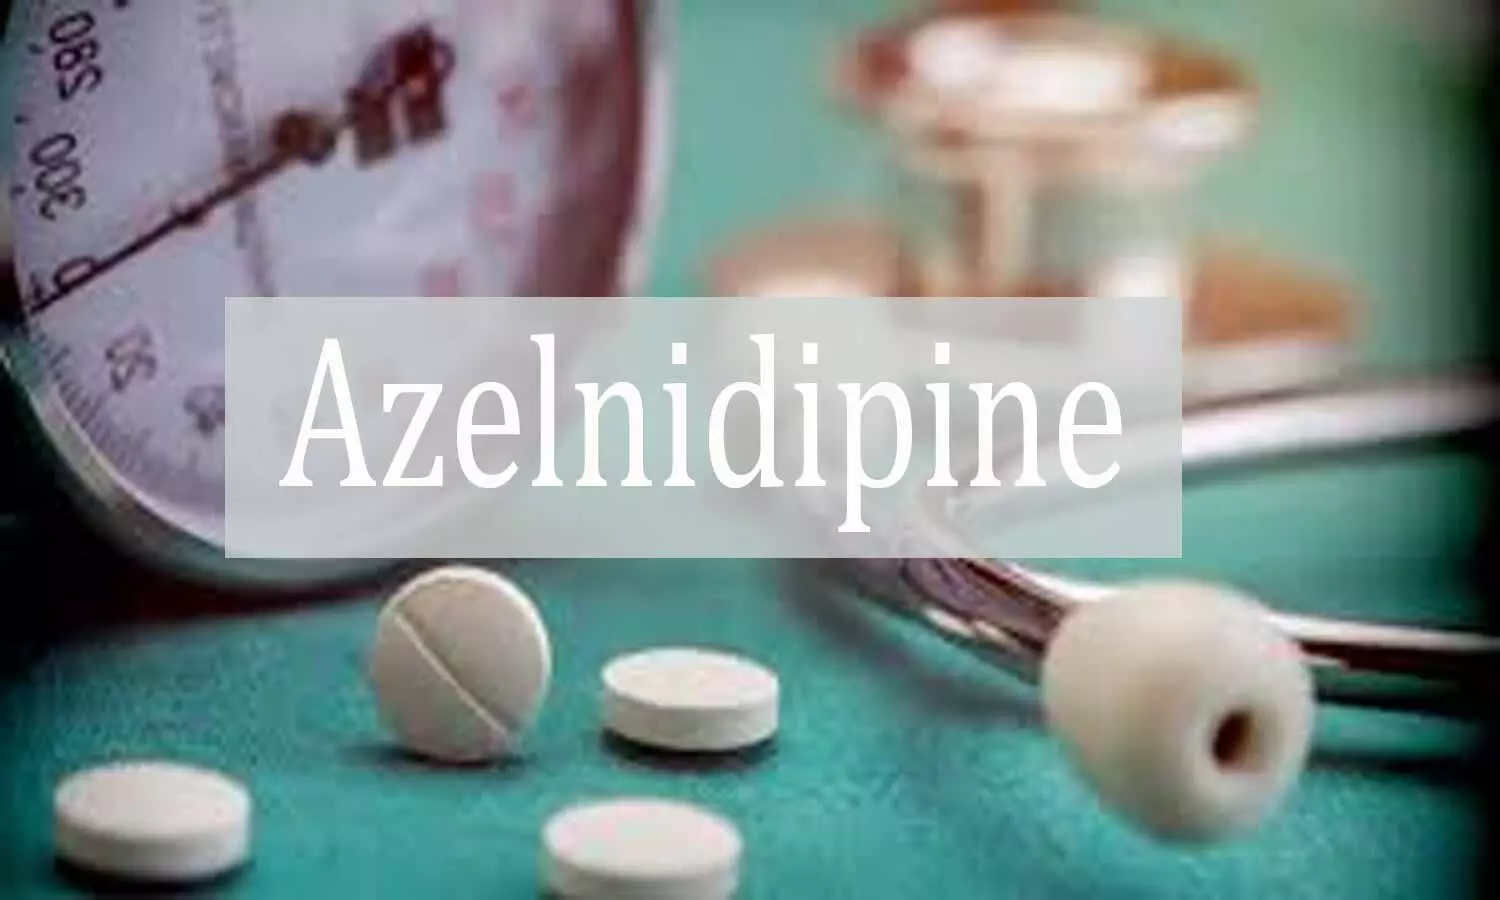 Role of Azelnidipine on management of BP in hypertensive Diabetics: Review